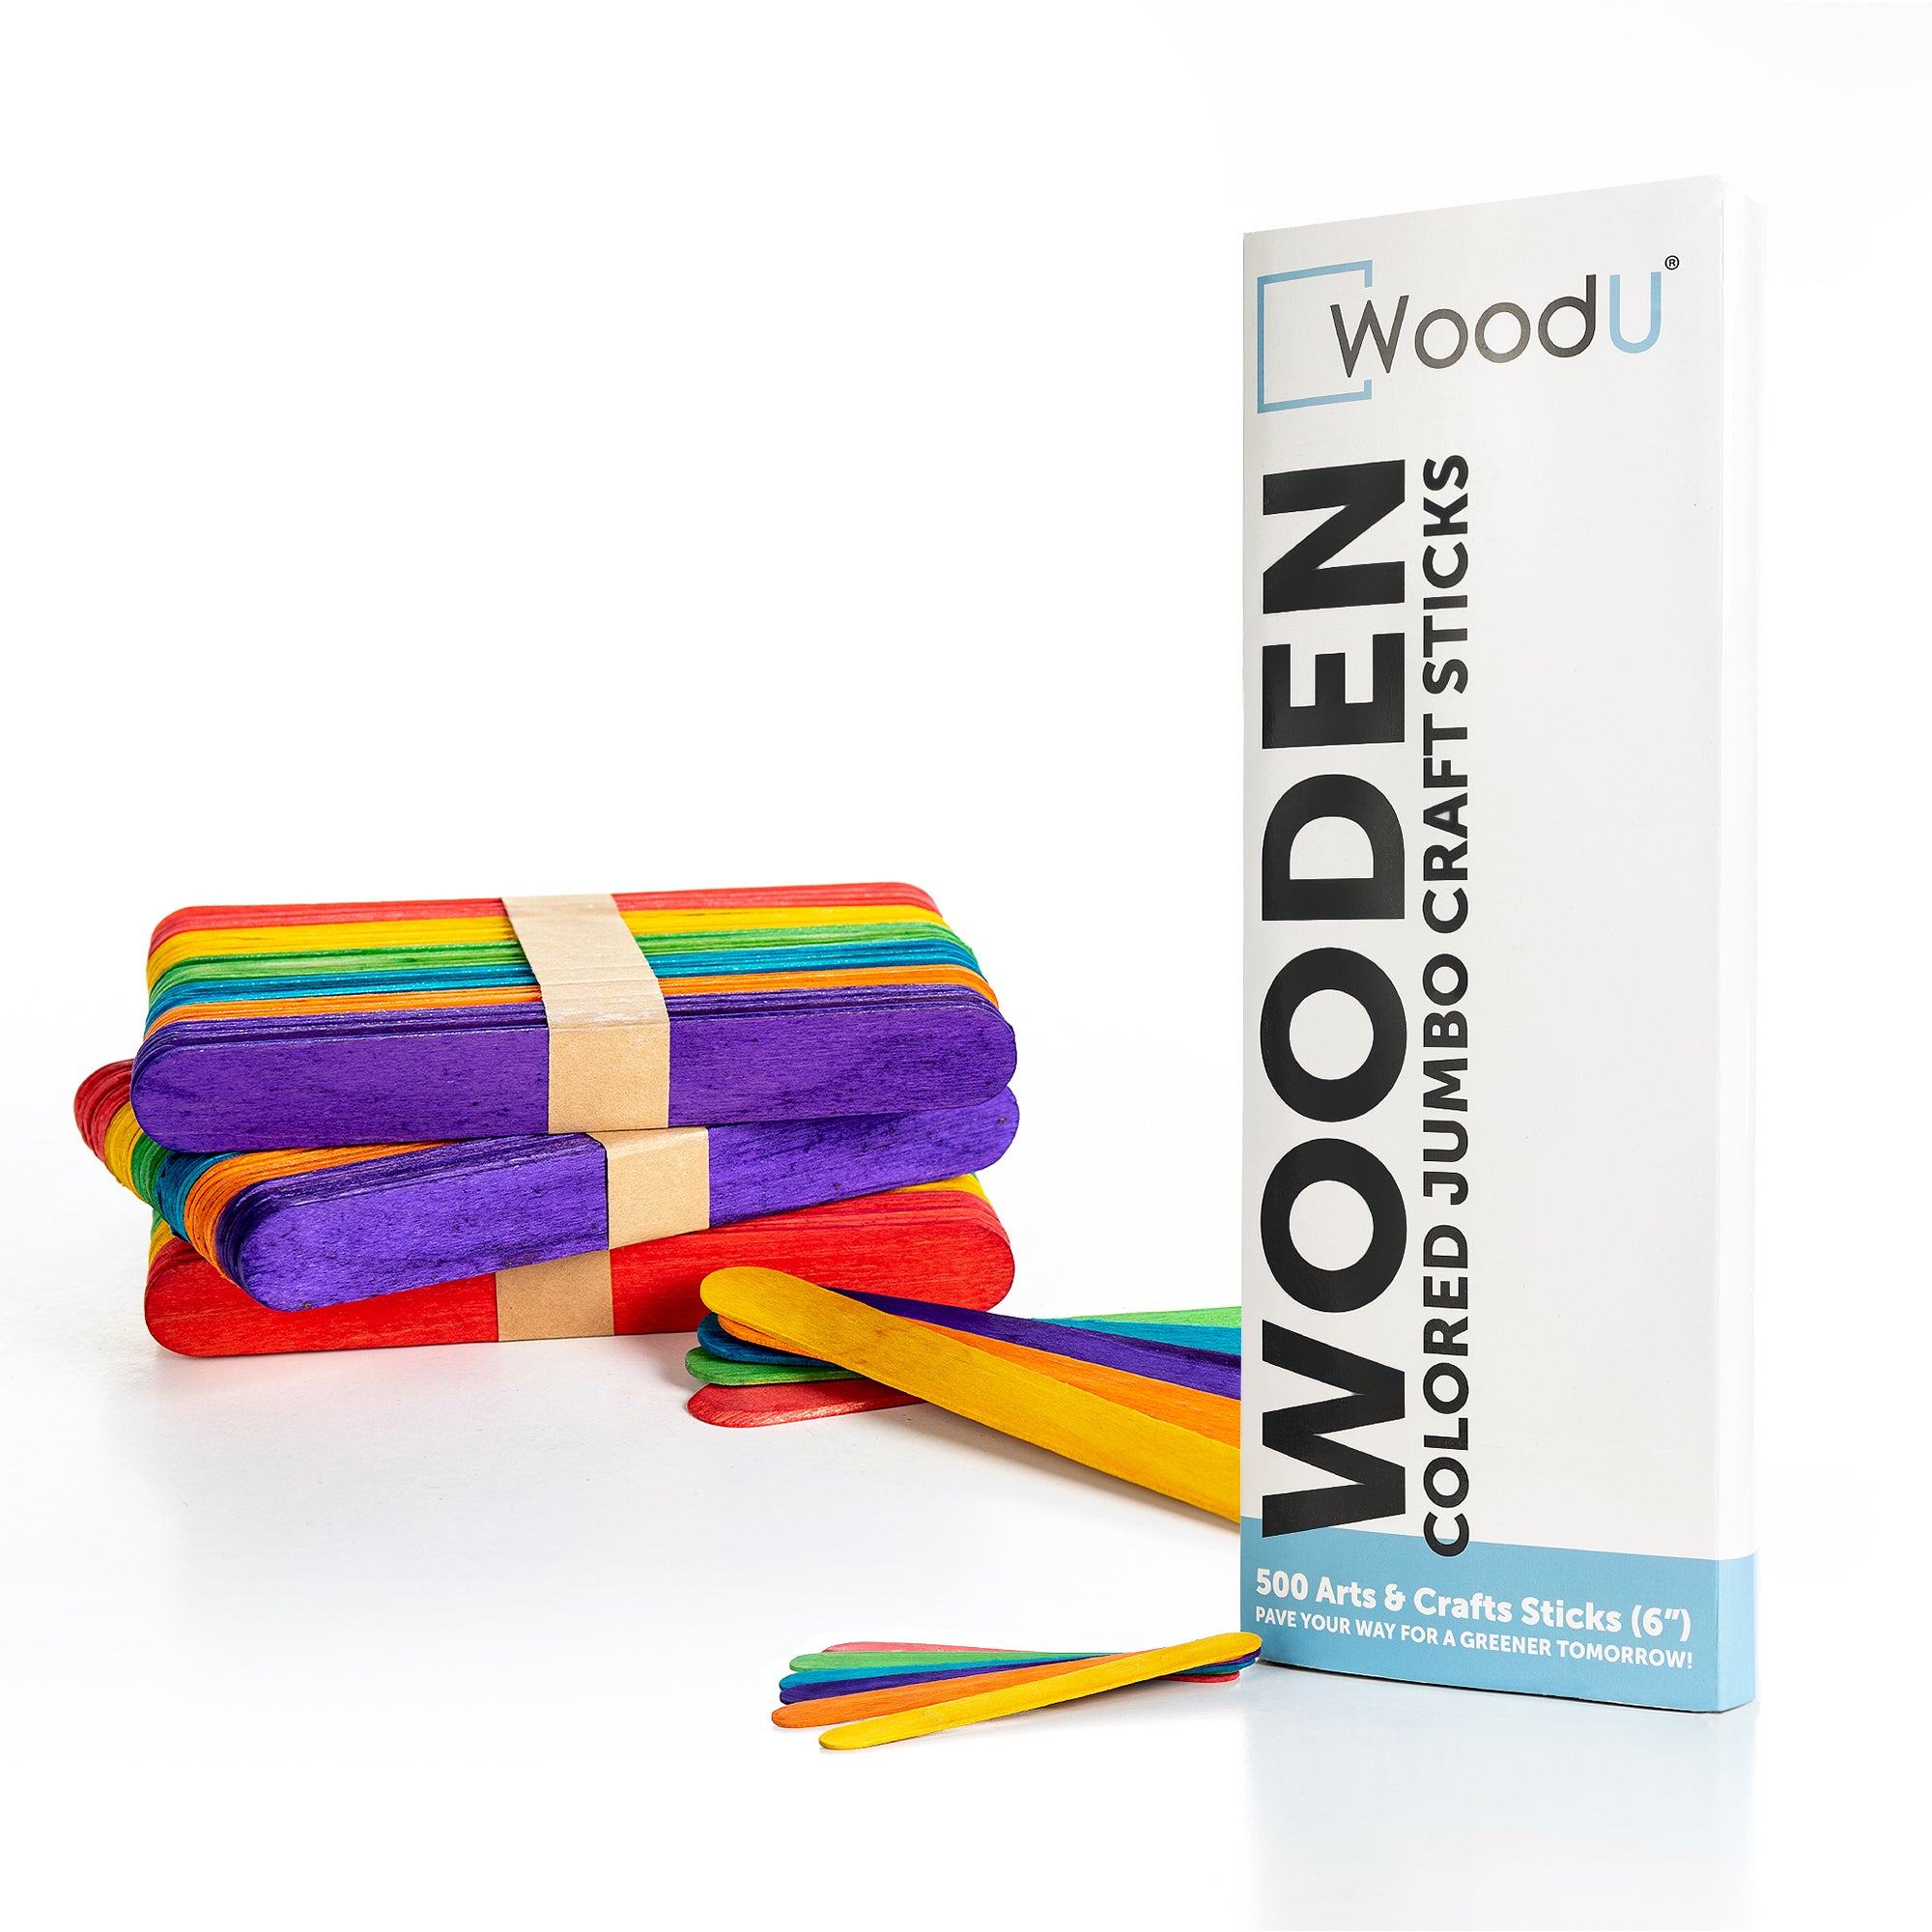 WoodU Wooden Craft Jumbo Colored Popsicle Sticks Eco-friendly Non-toxic